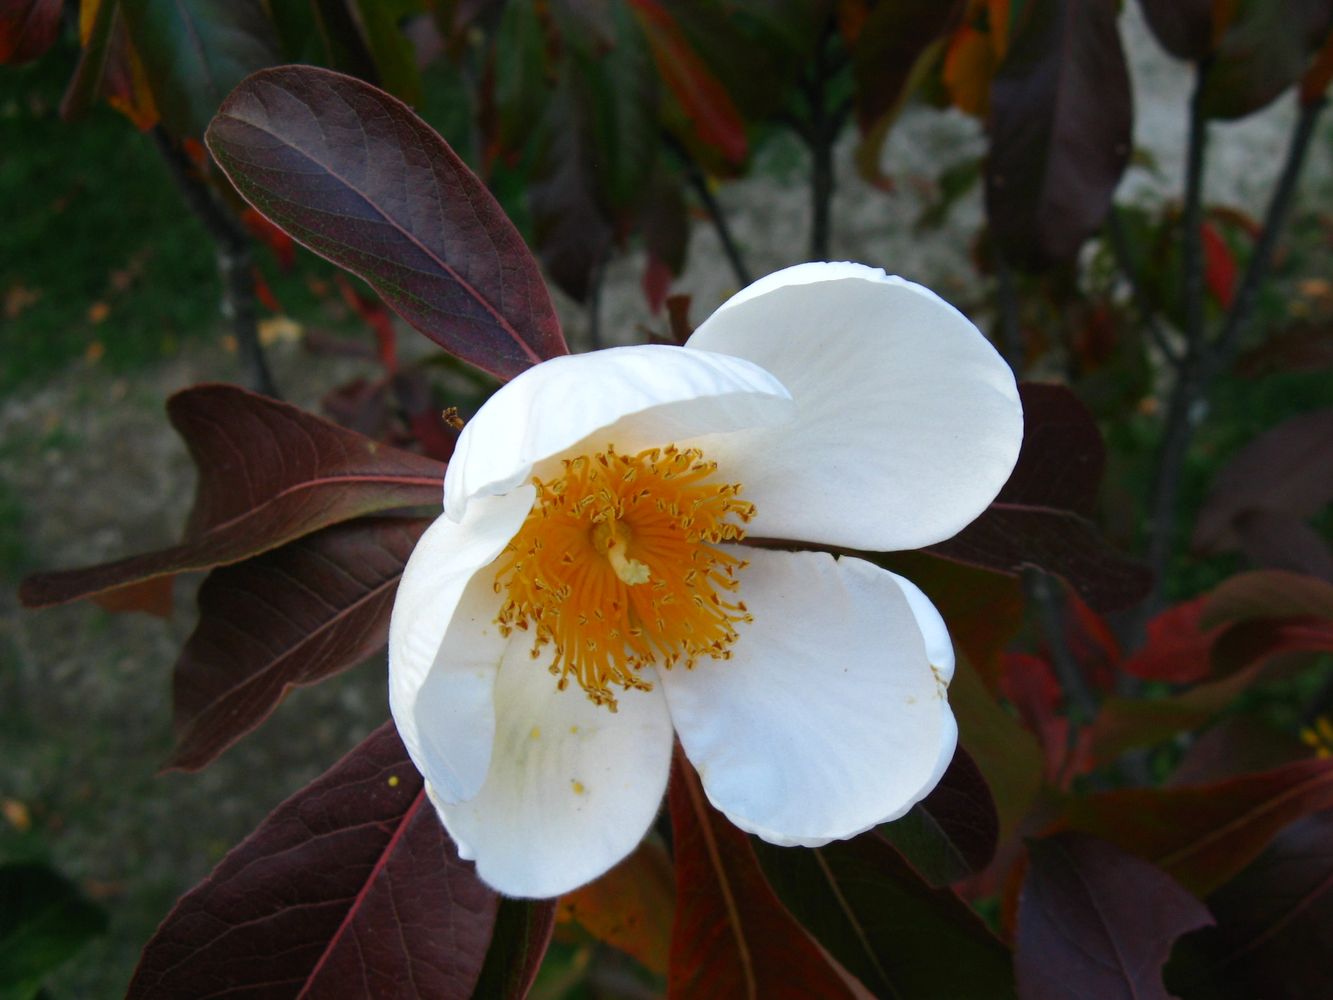 Franklinia alatamaha is one of the many rare and outstanding ornamental plants found at Homegrown